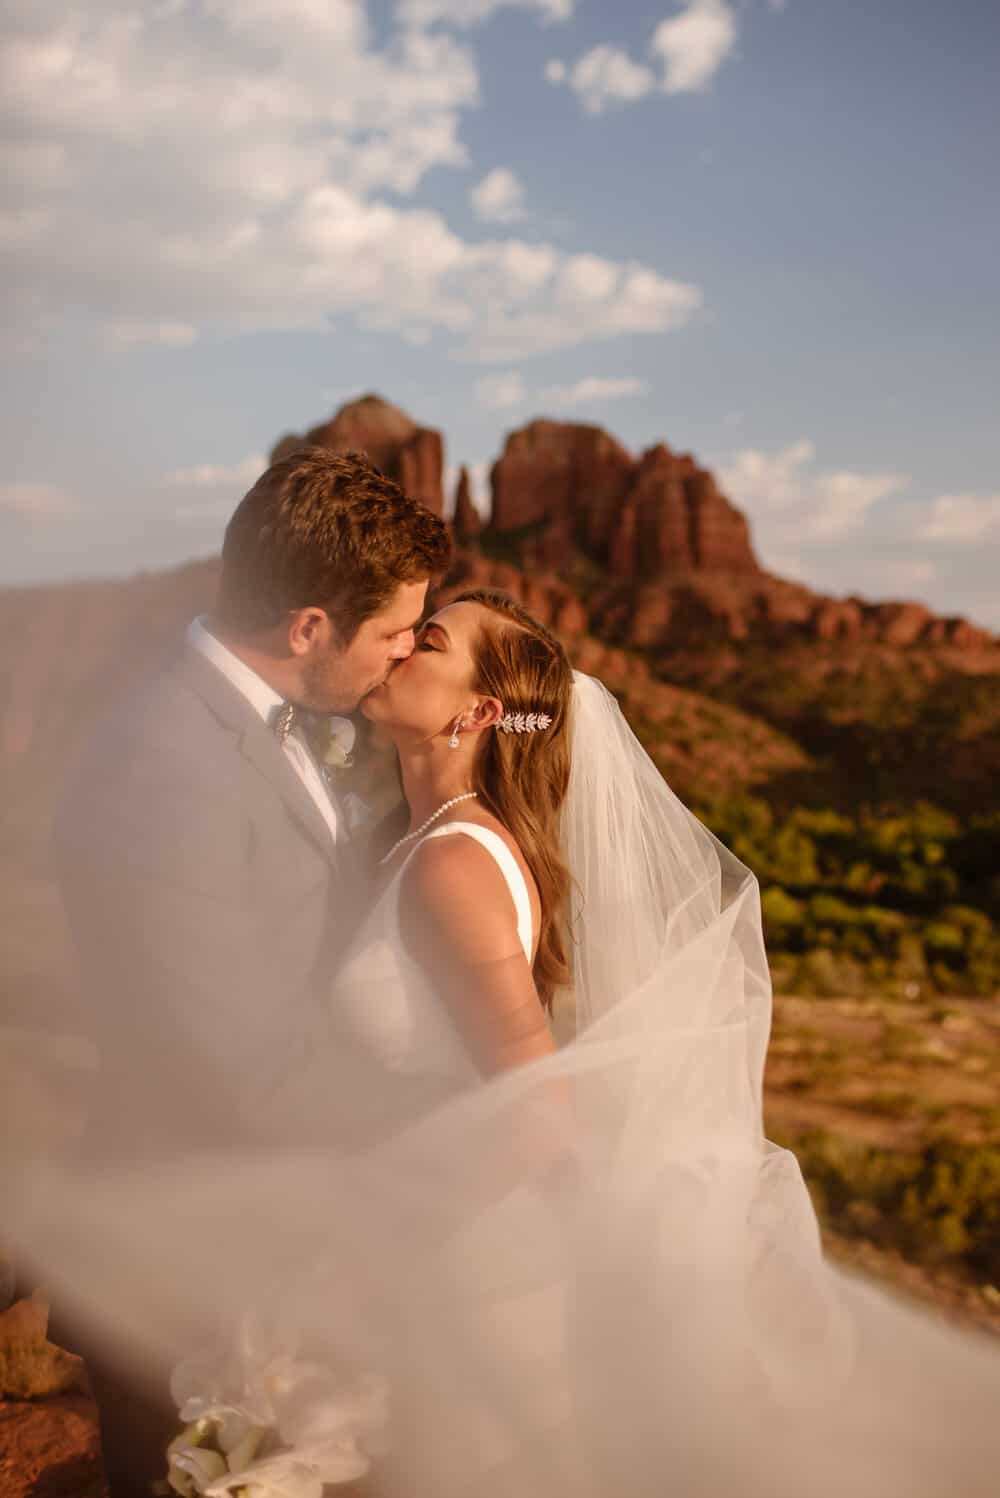 A bride and groom share a kiss with cathedral rock in the background.